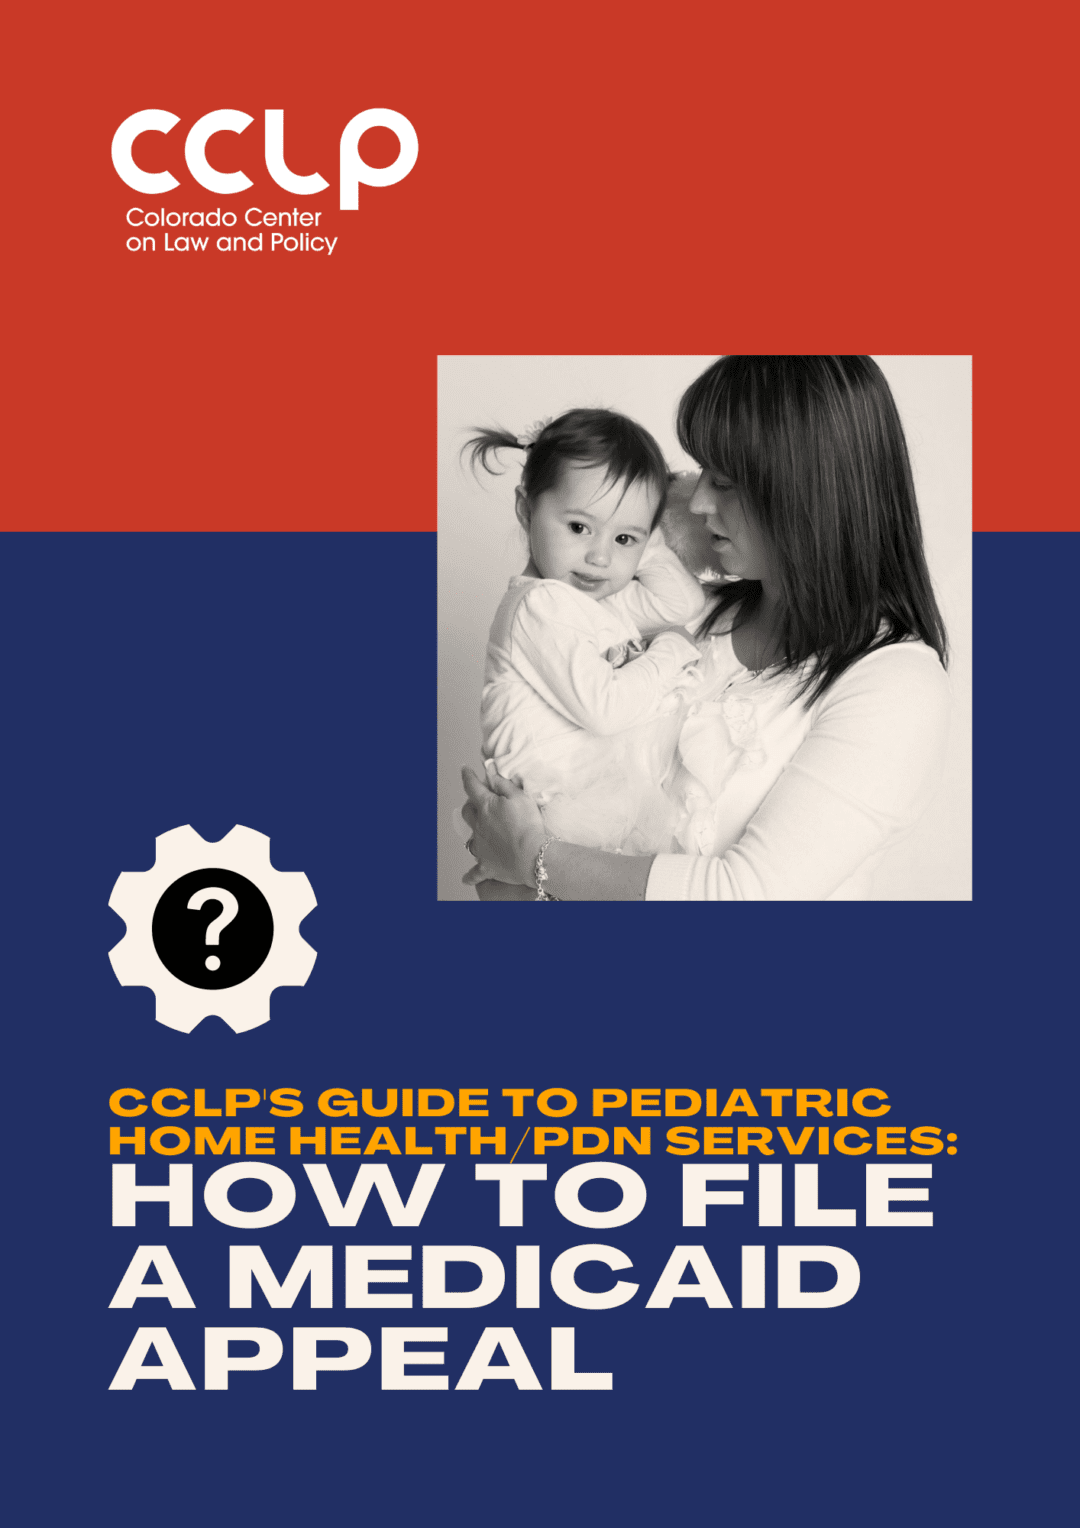 How to file a Medicaid appeal for pediatric home health and PDN services